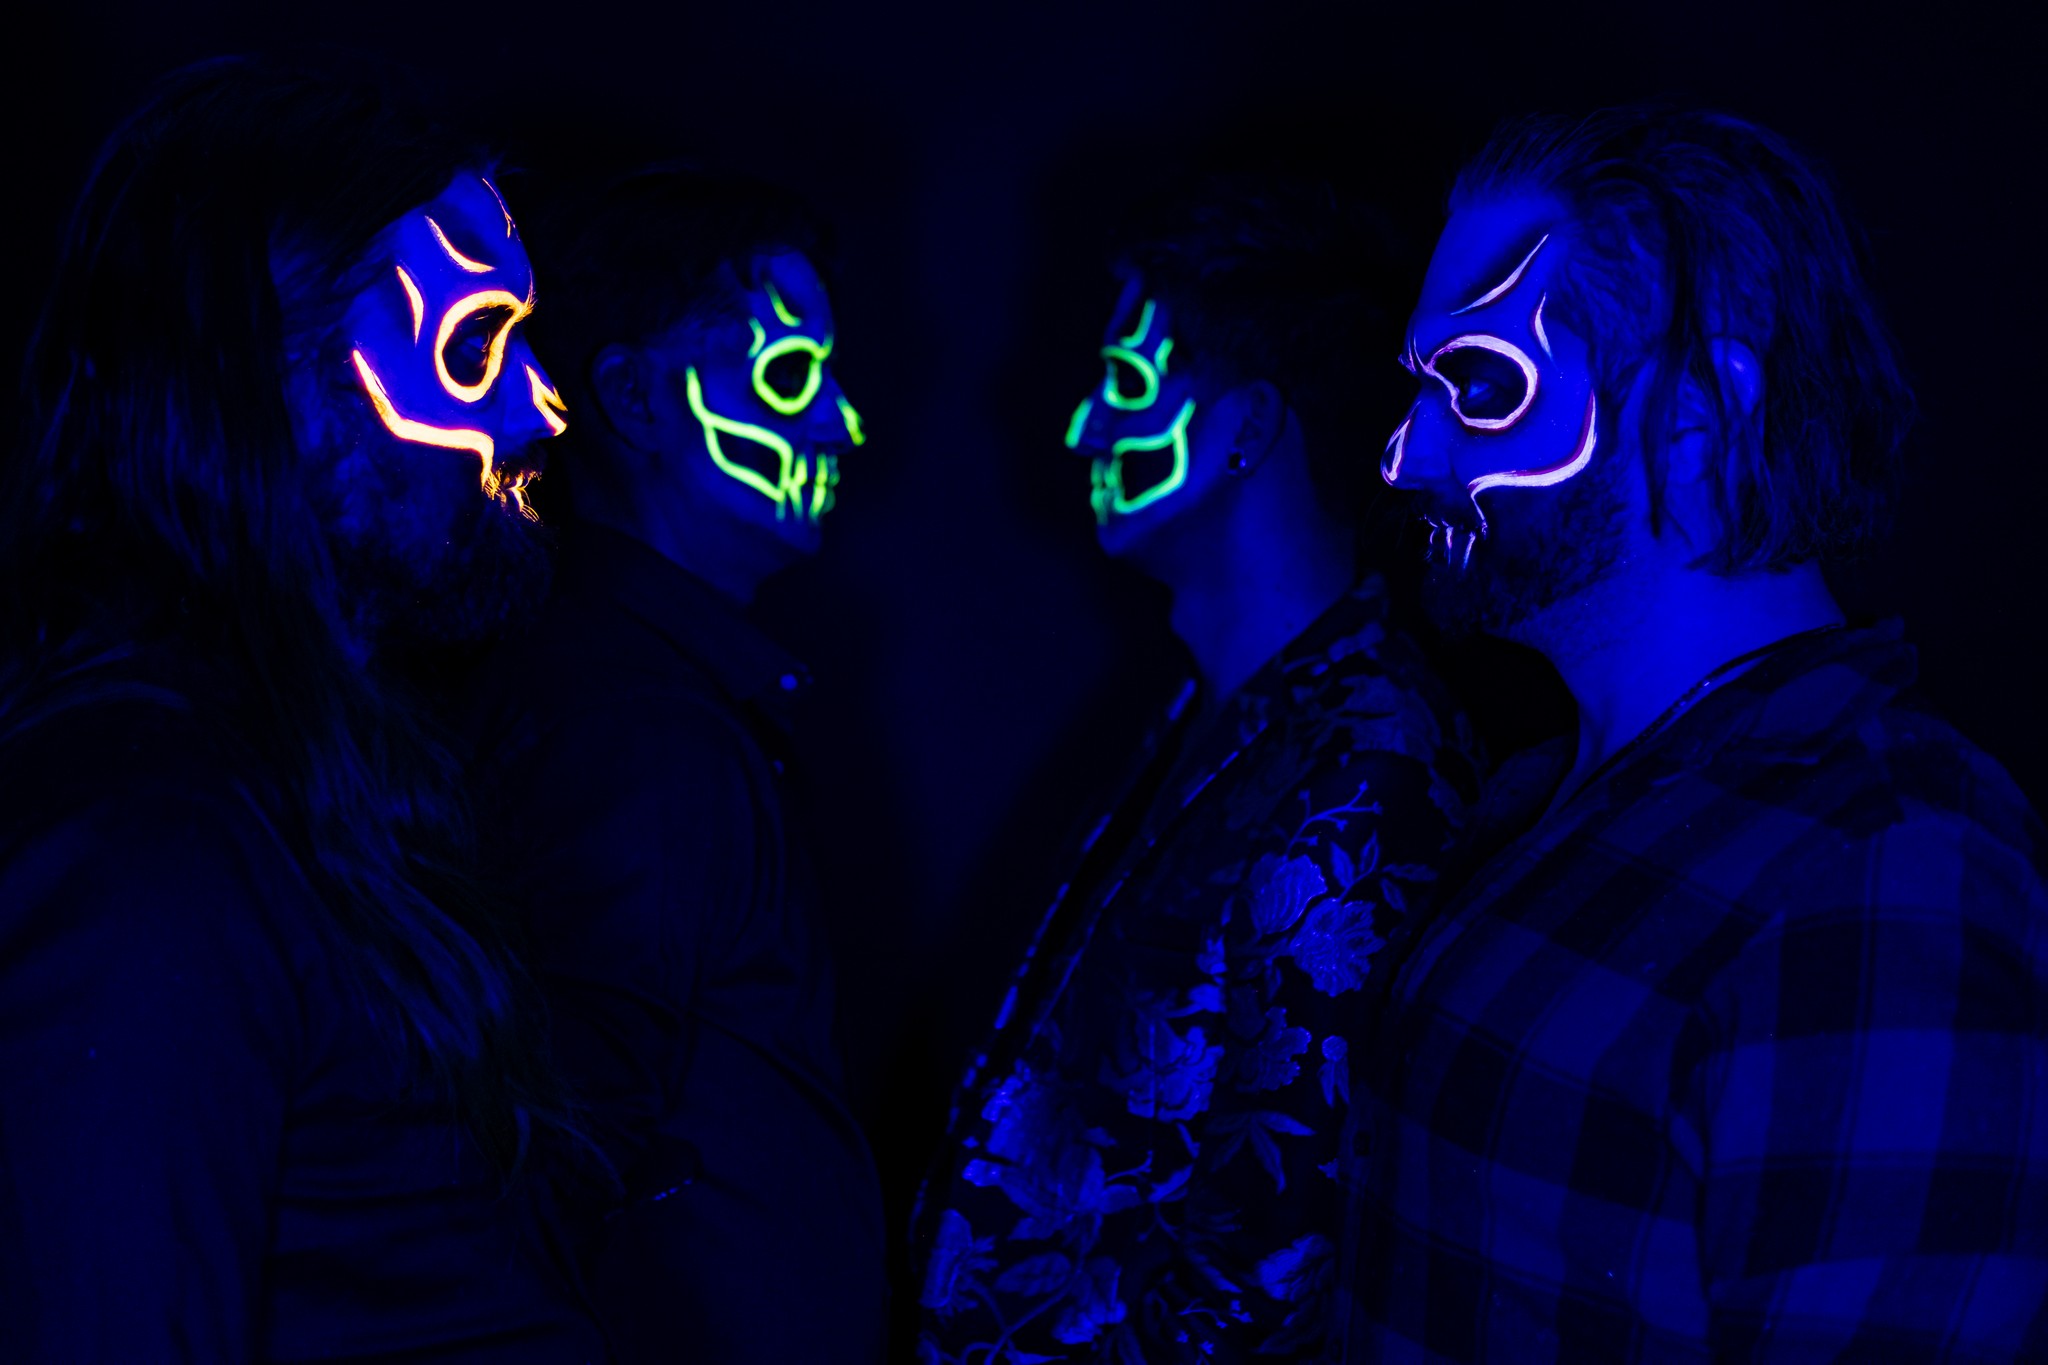 Against a black background, four men stand facing each other, two by two, wearing UV-reactive skull facepaint